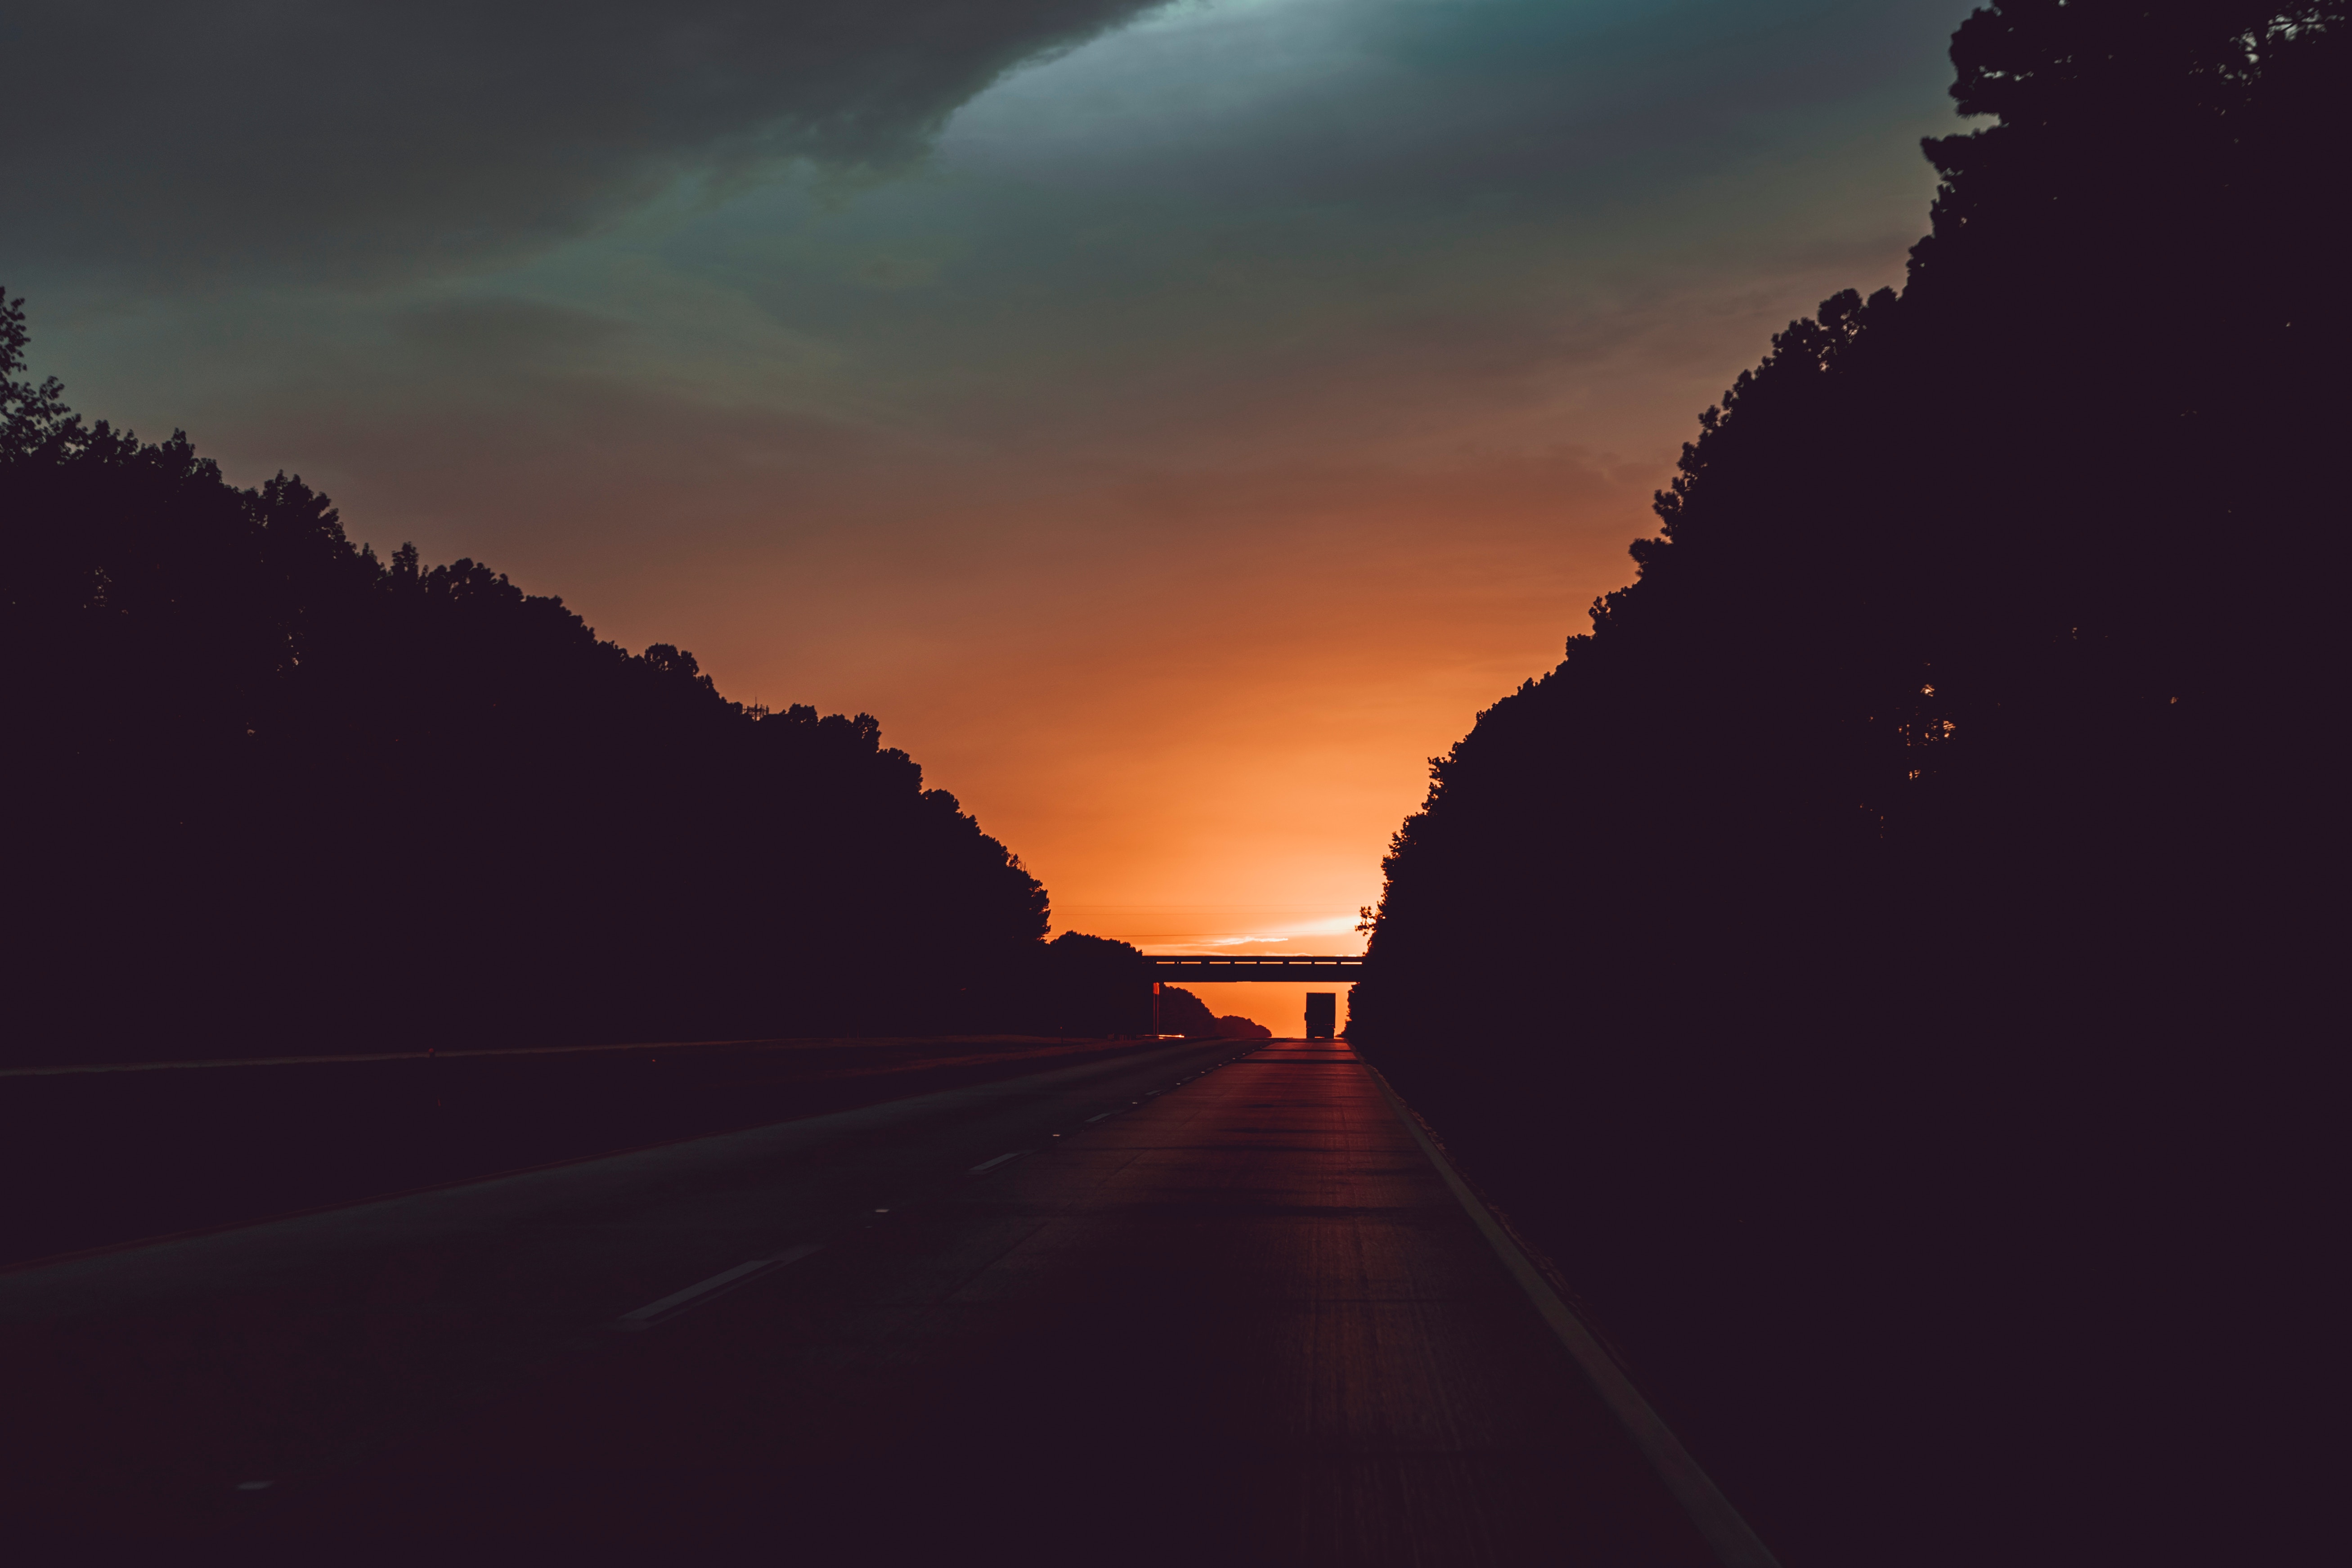 sunset, movement, twilight, dark, clouds, road, traffic, dusk cell phone wallpapers